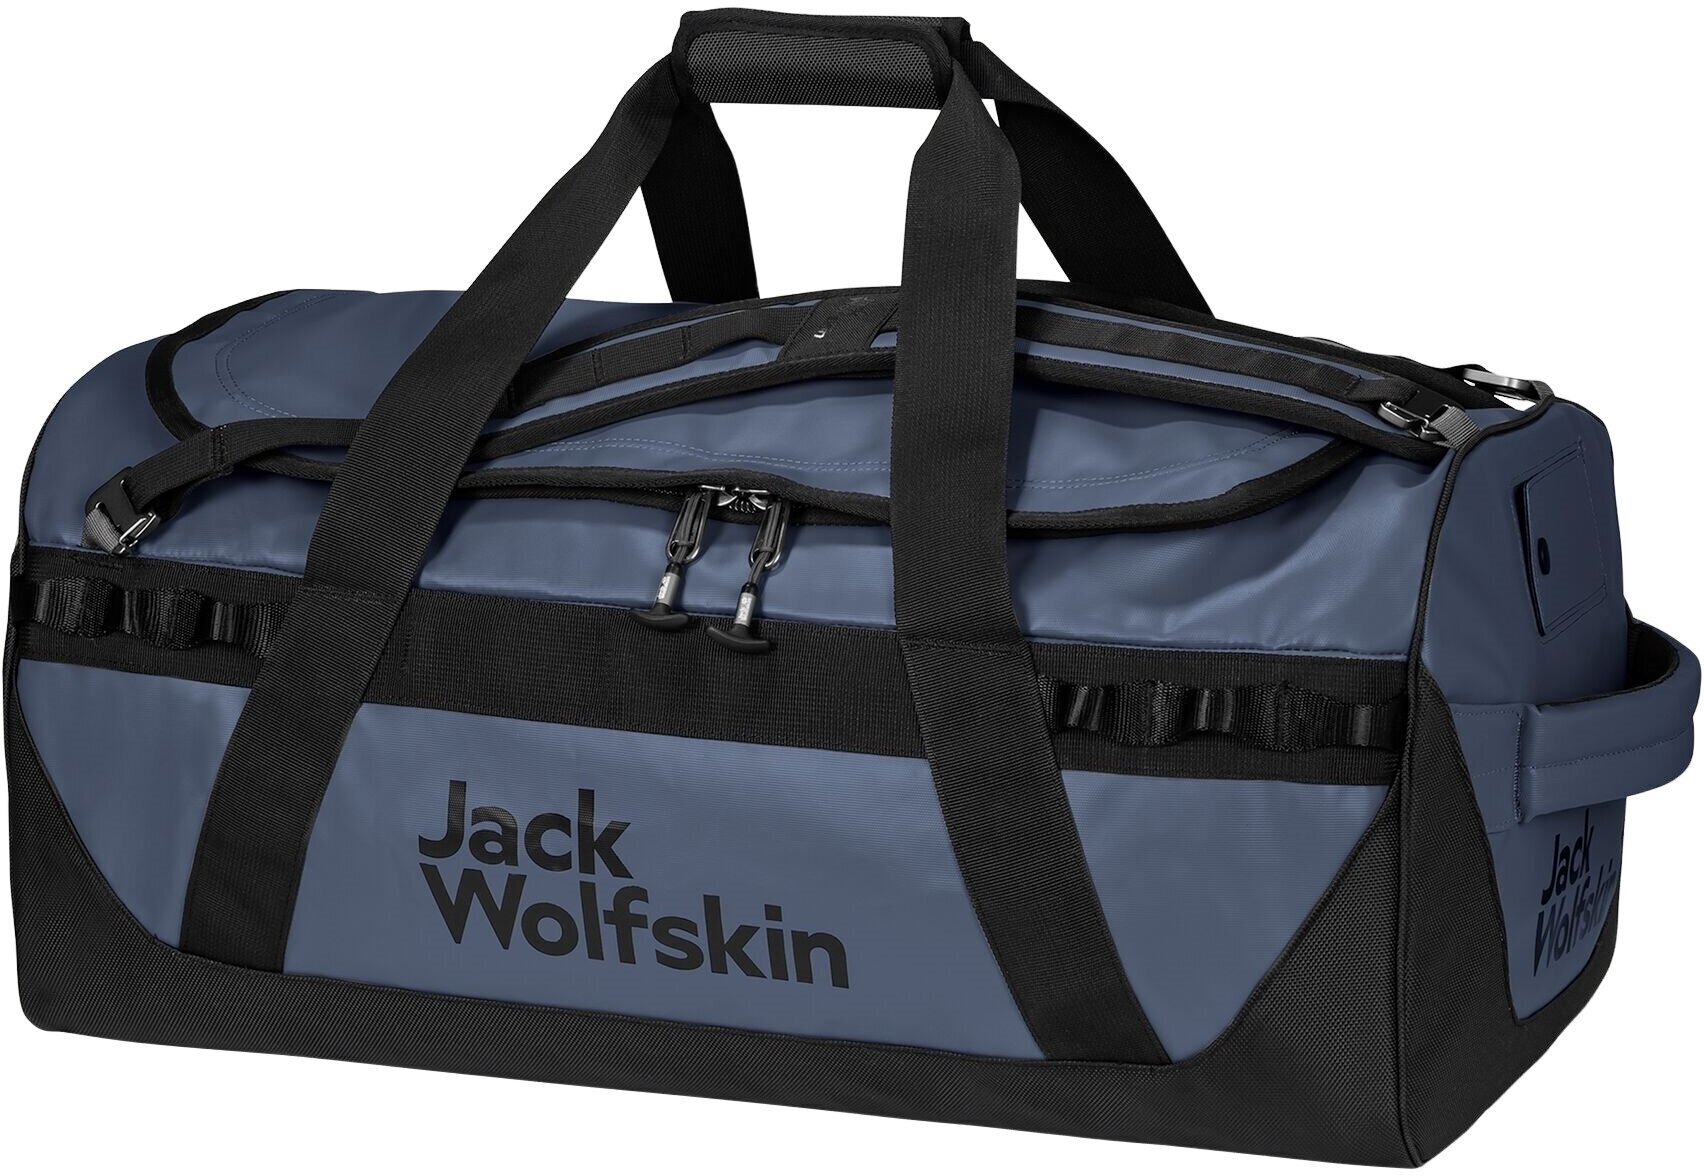 Outdoor Backpack Jack Wolfskin Expedition Trunk 65 Evening Sky Outdoor Backpack